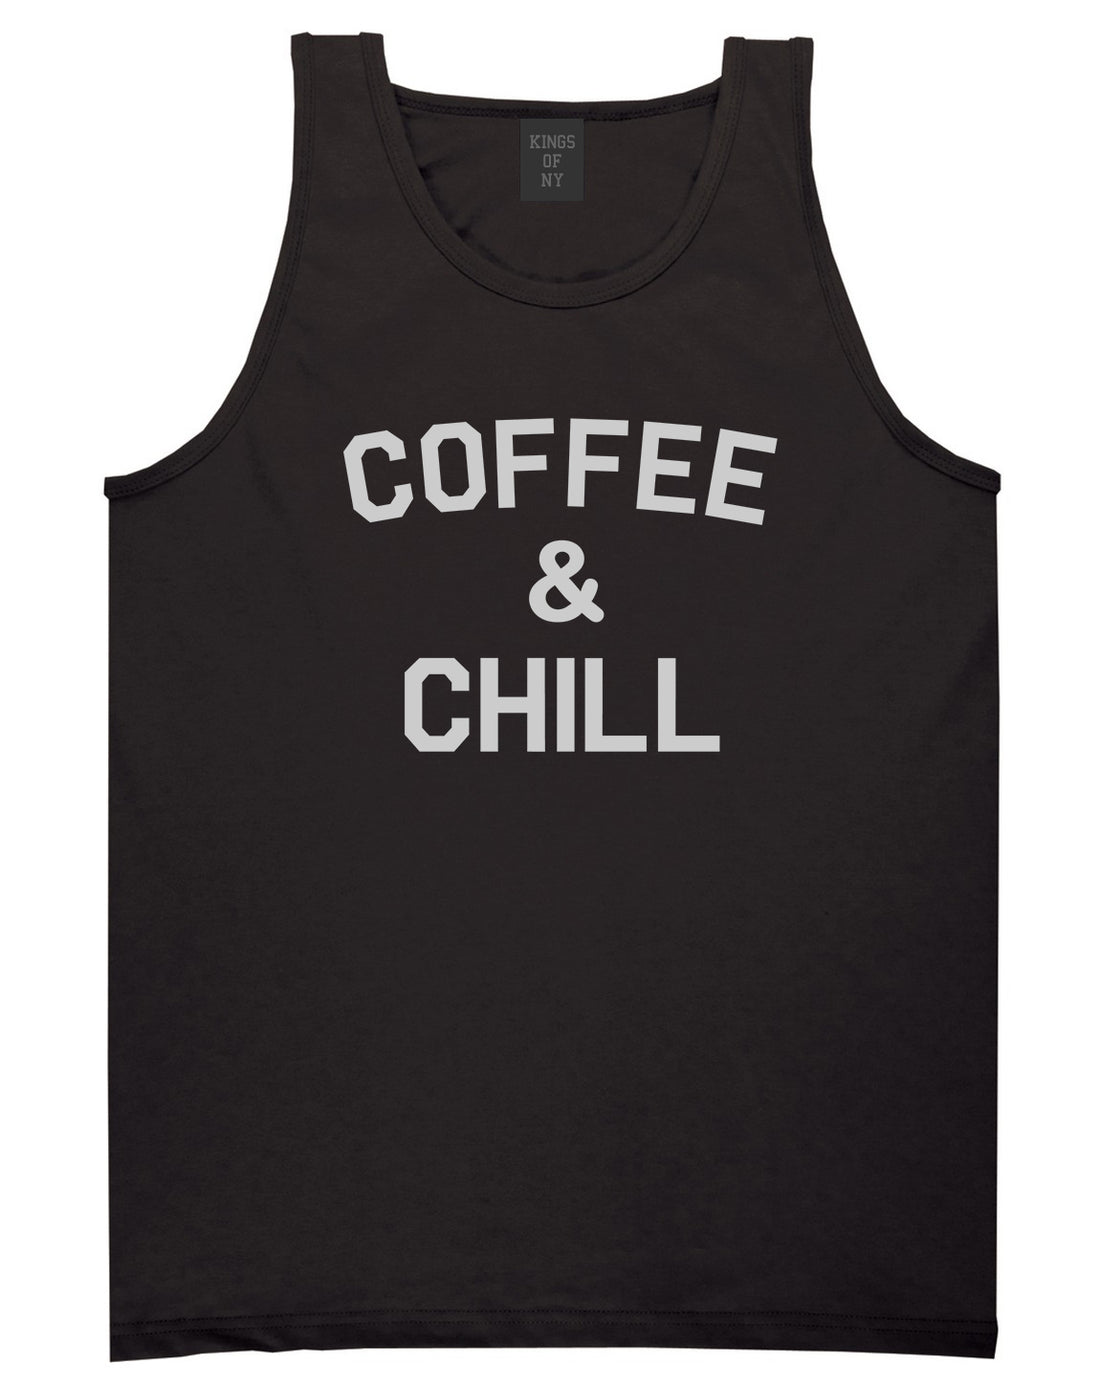 Coffee And Chill Funny Mens Tank Top Shirt Black